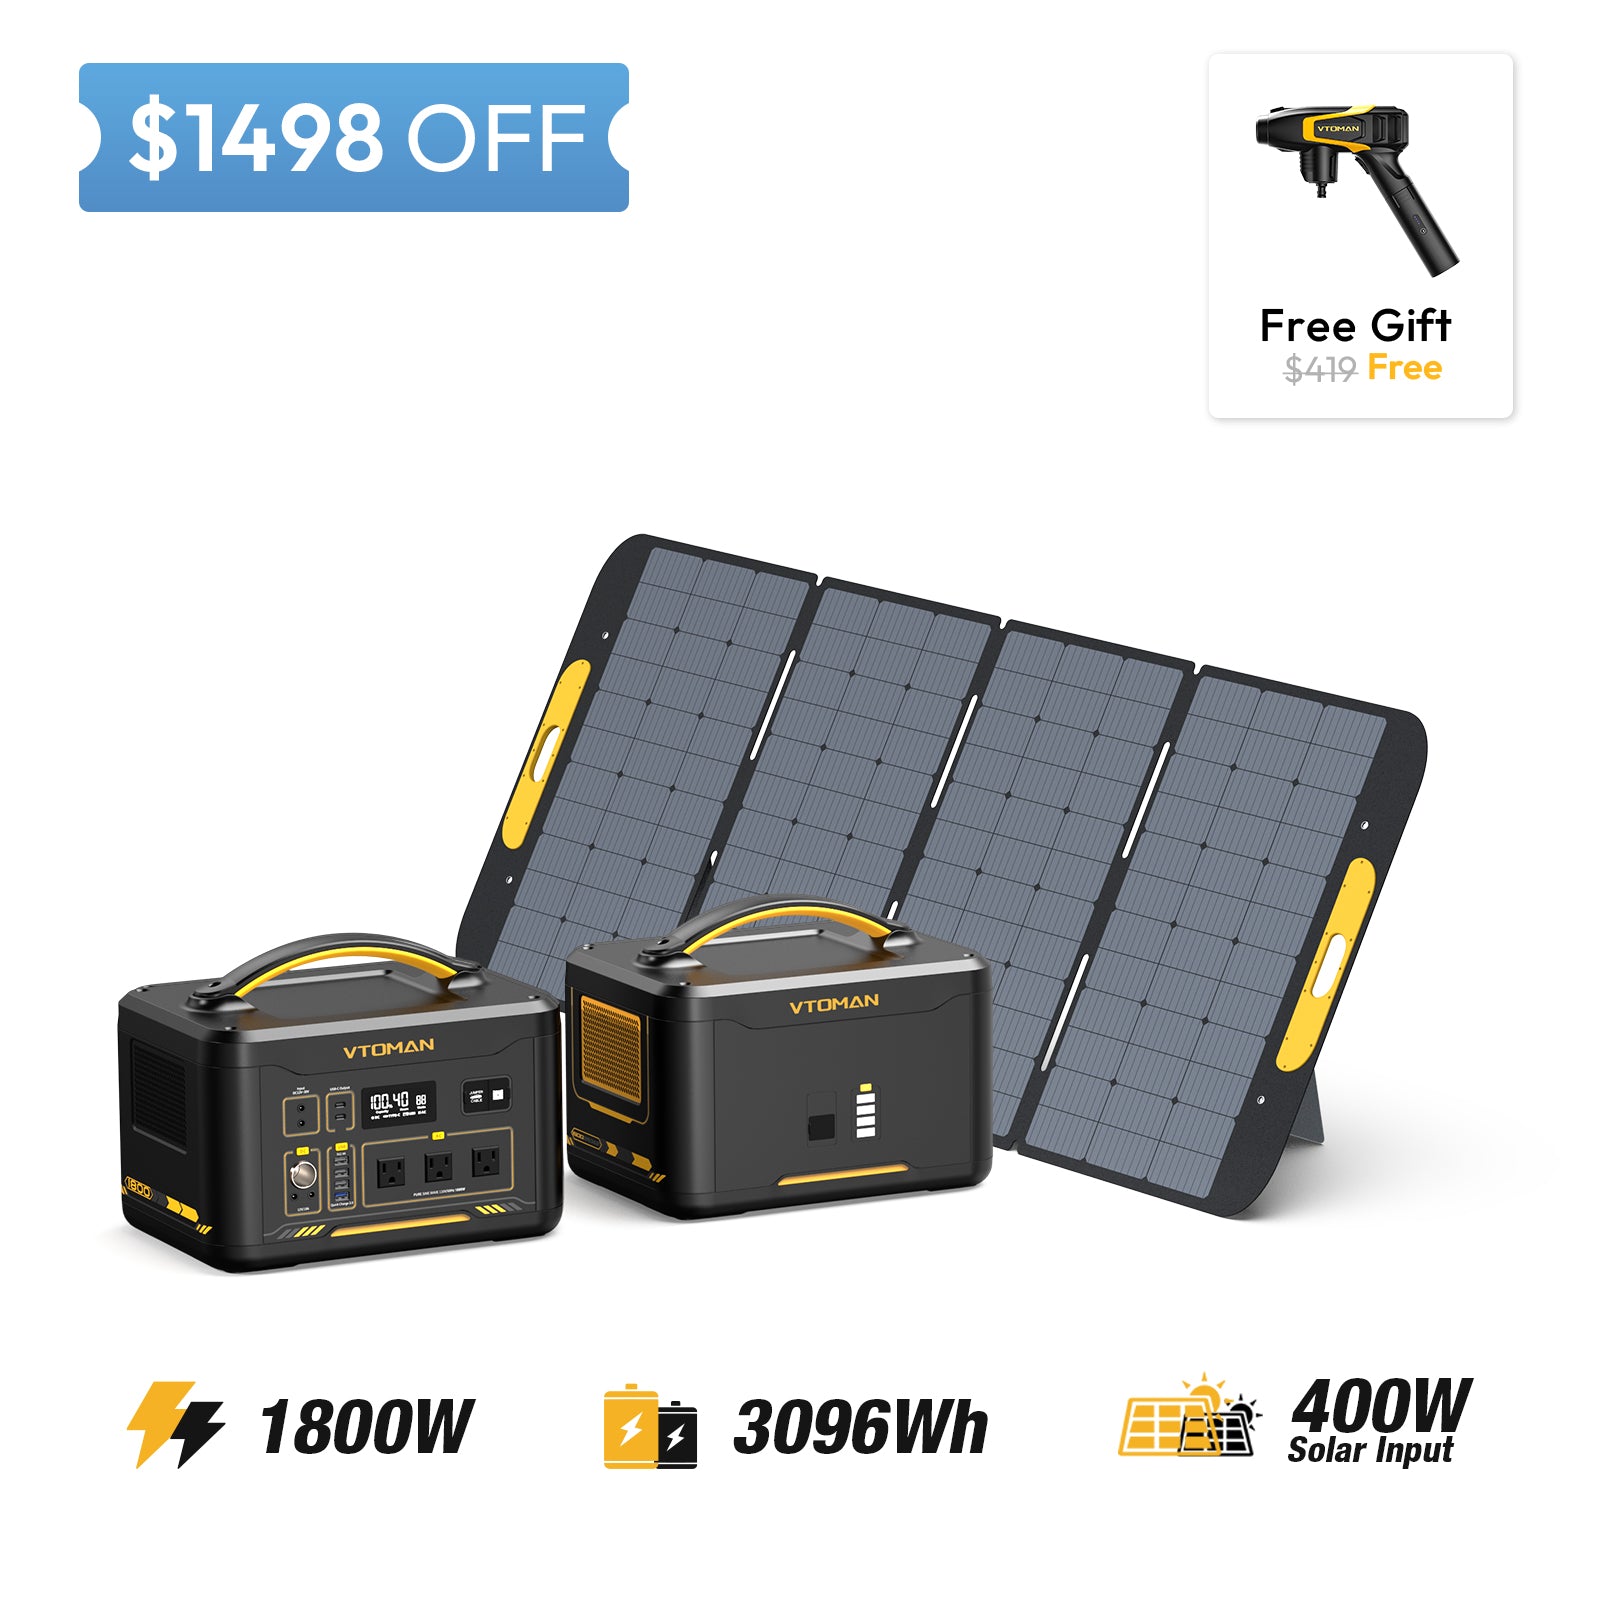 jump 1800 and 1548wh extra battery and 400w solar panel save $1498in summer sale